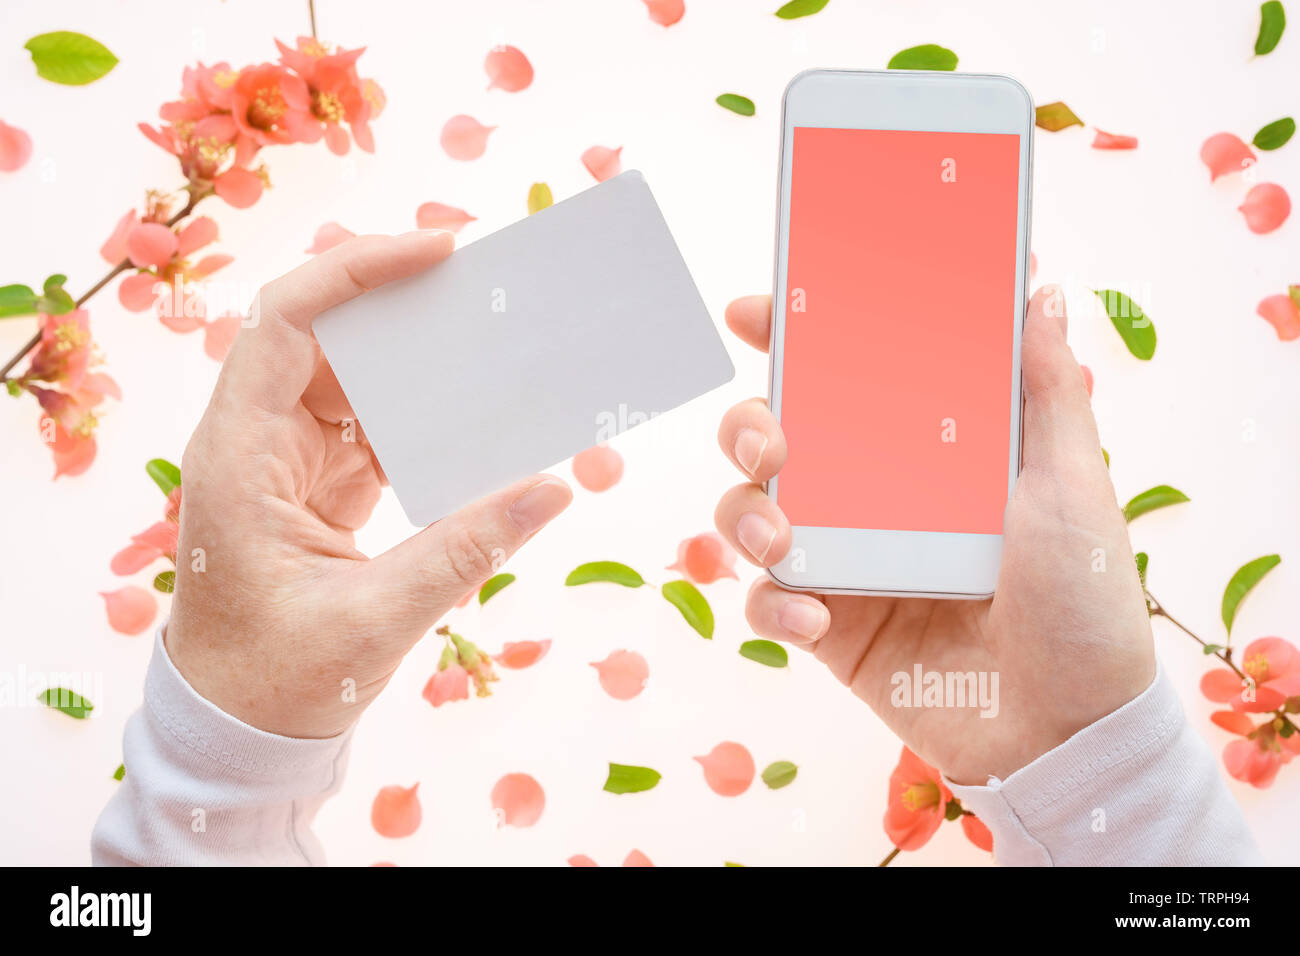 Springtime business card and smartphone in female hands mock up with colorful floral decoration Stock Photo